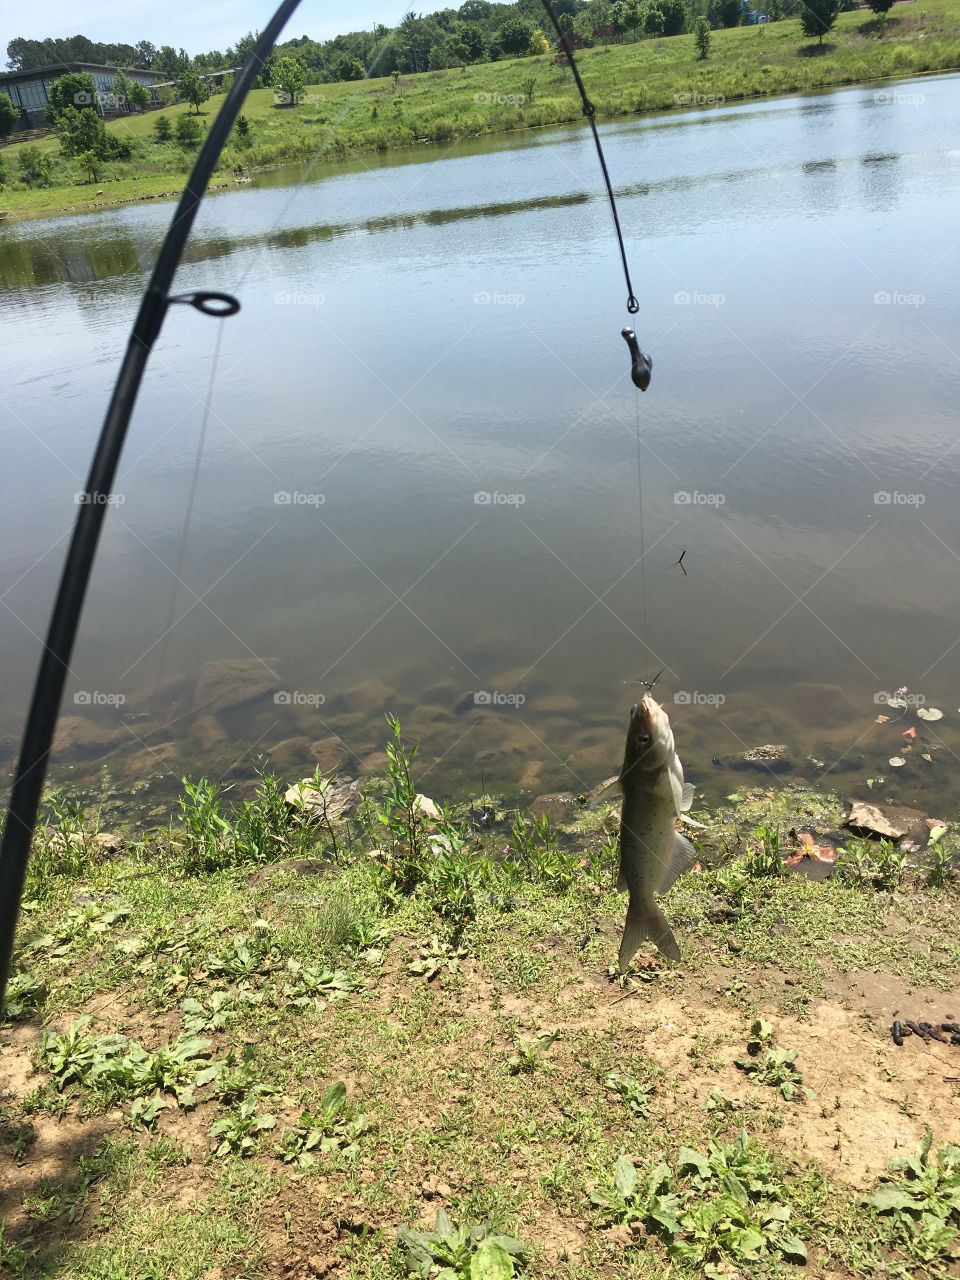 A perfect day fishing